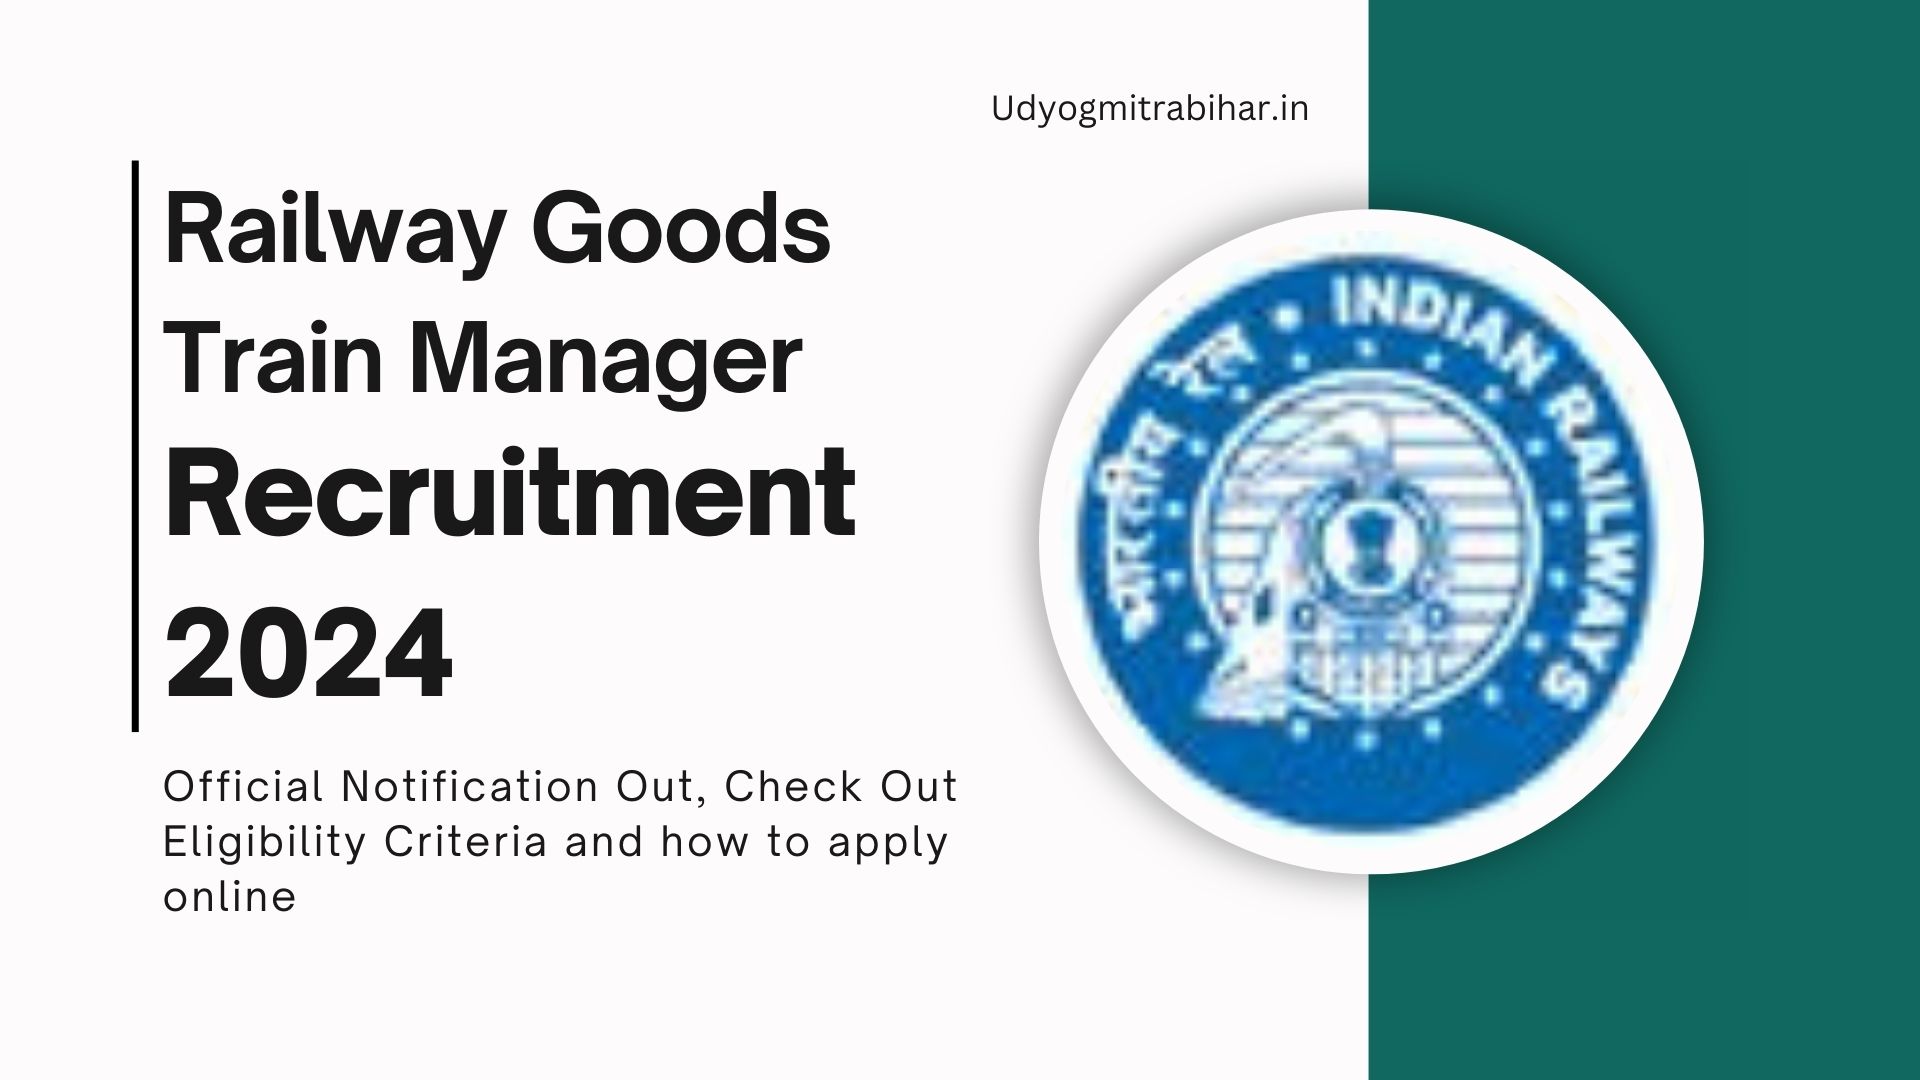 Railway Goods Train Manager Recruitment 2024, Apply Now, Eligibility Criteria, Required Documents, Salary